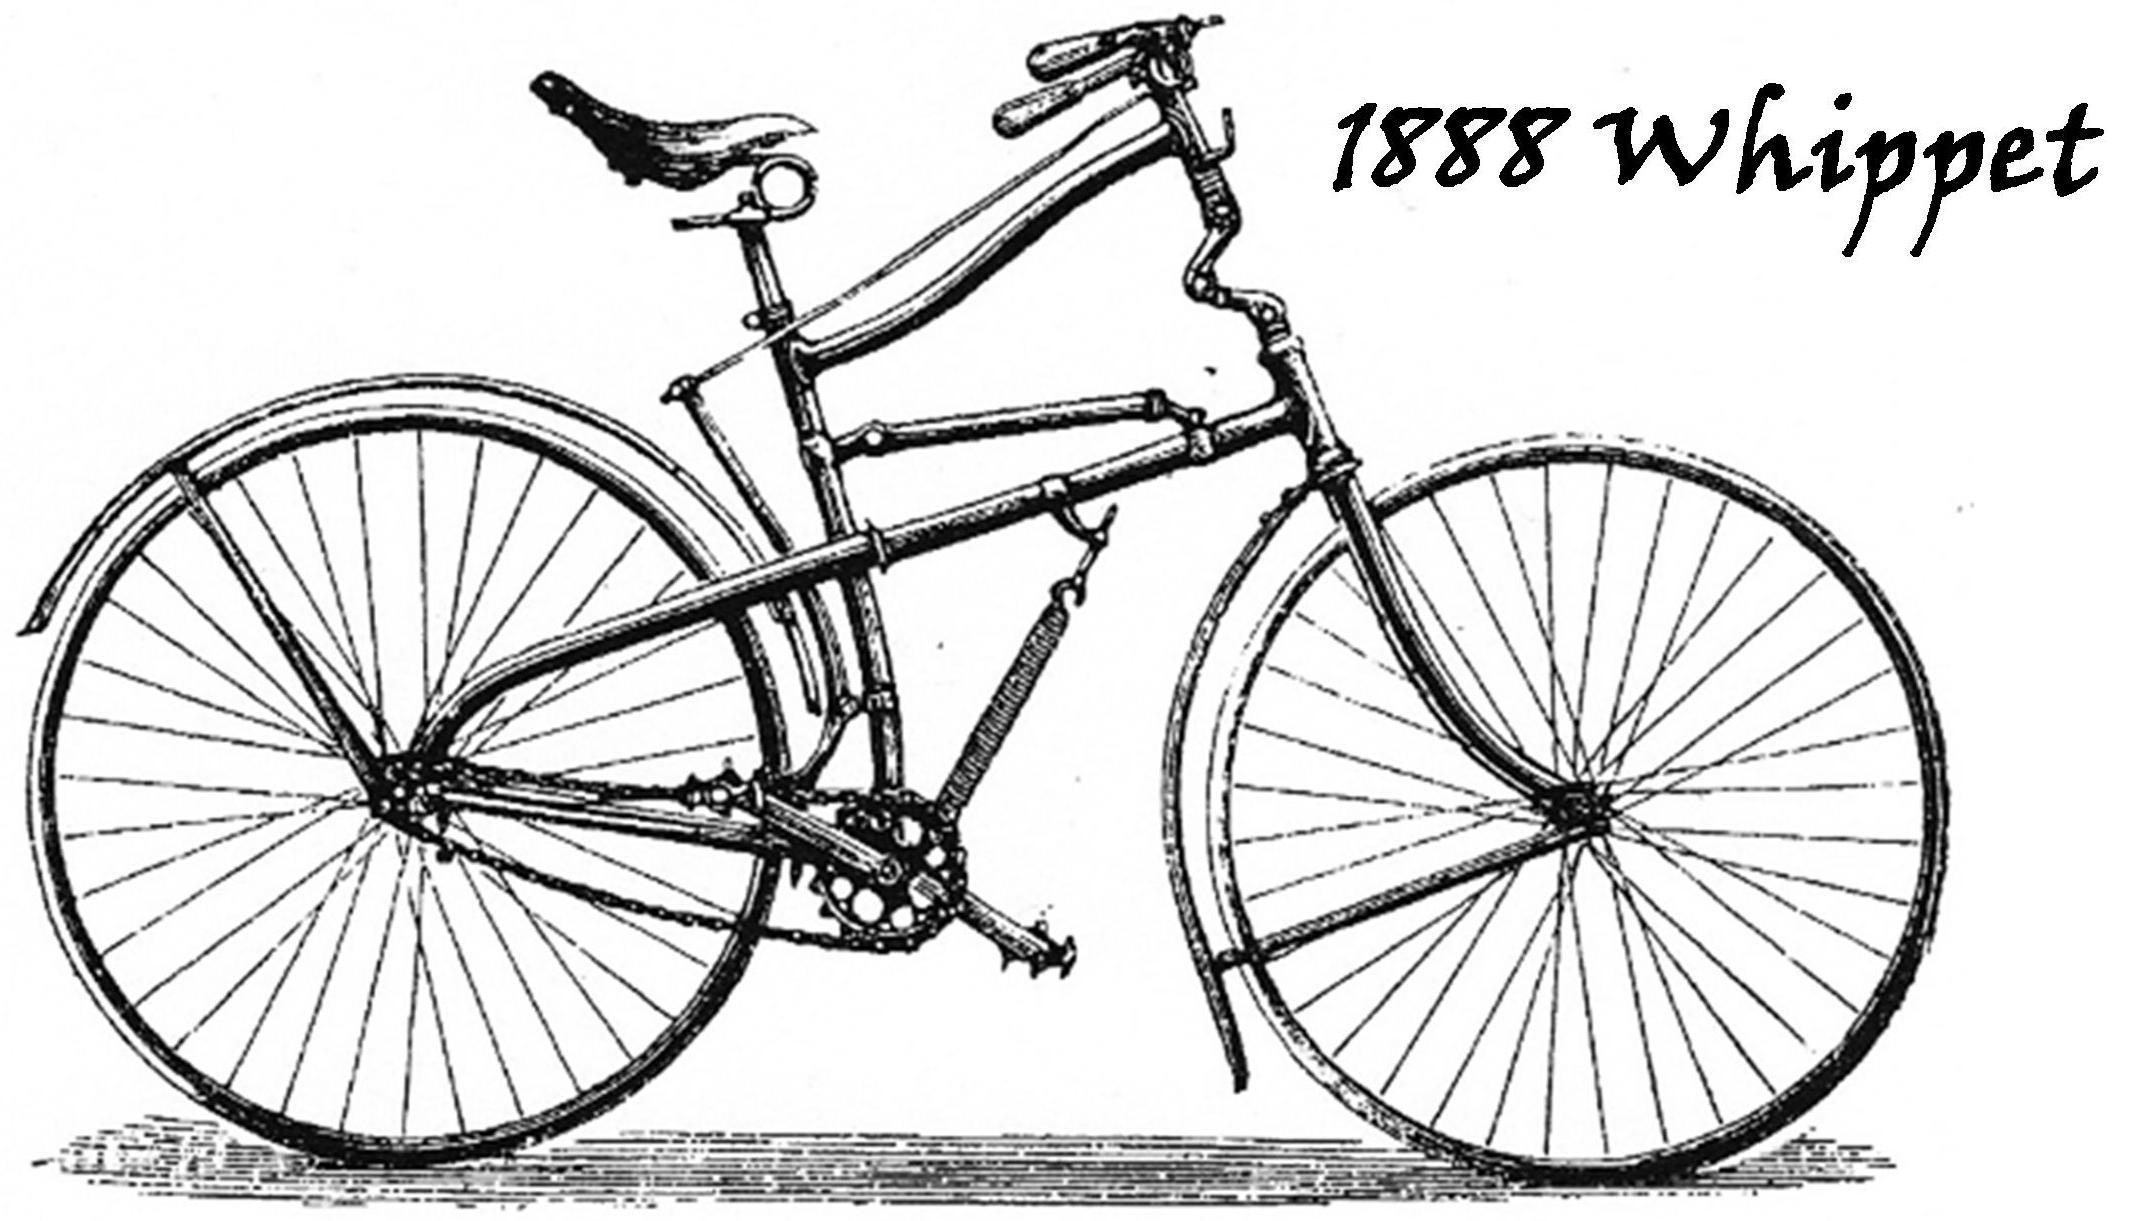 For Sale - 1888 Whippet Bicycle - Paul BrodieFlashback Fabrications Ltd.